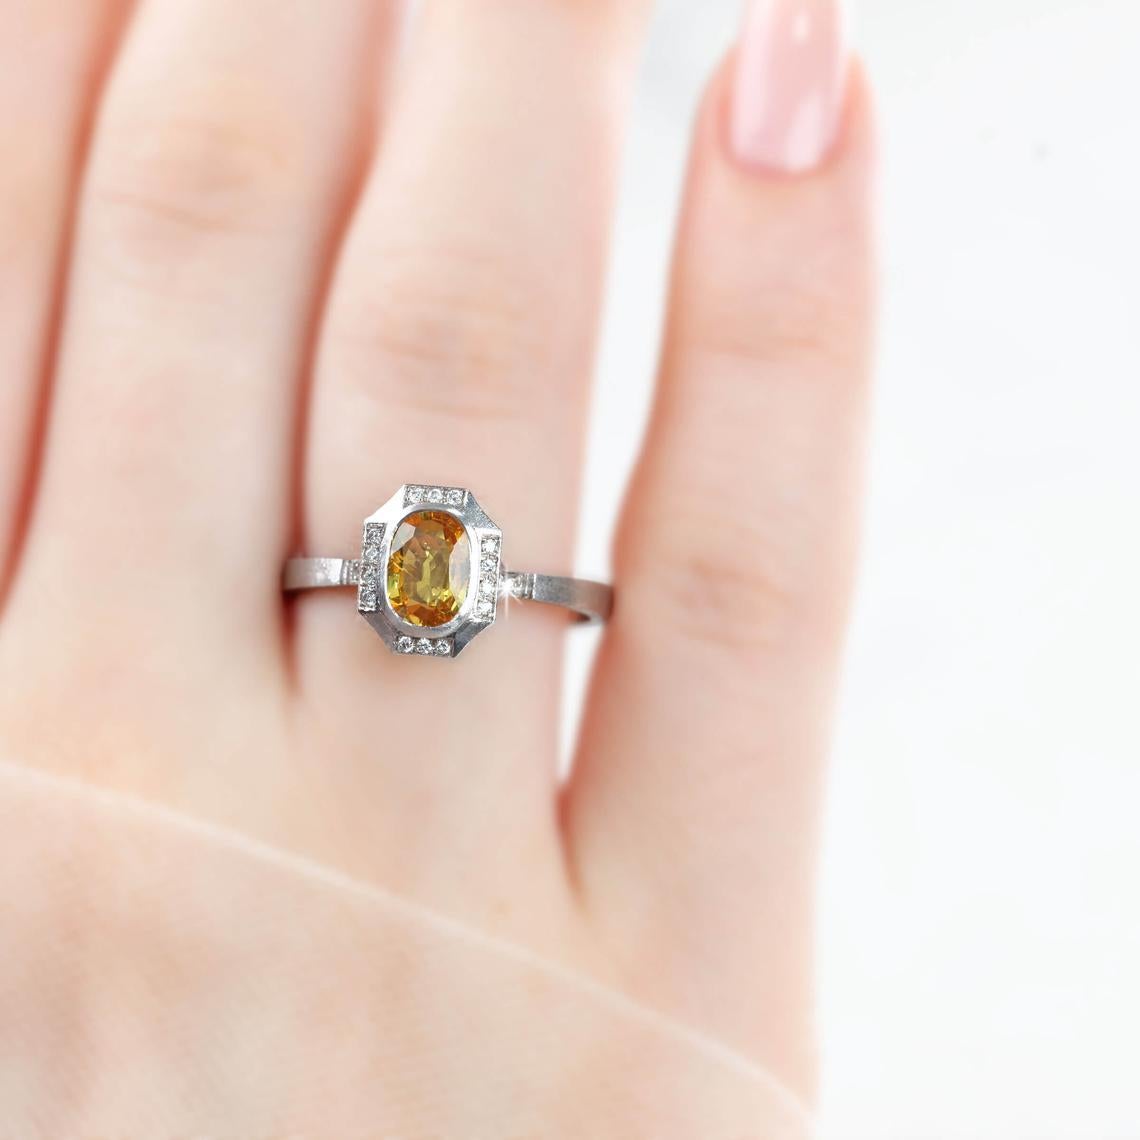 Vintage Yellow Sapphire With Diamond Engagement Ring, 14K Solitaire Ring, created by hands from ring to the stone shapes. Good ideas of statement ring or engagement ring gift for her.

I used brillant yellow diamond in vintage style for lovers of